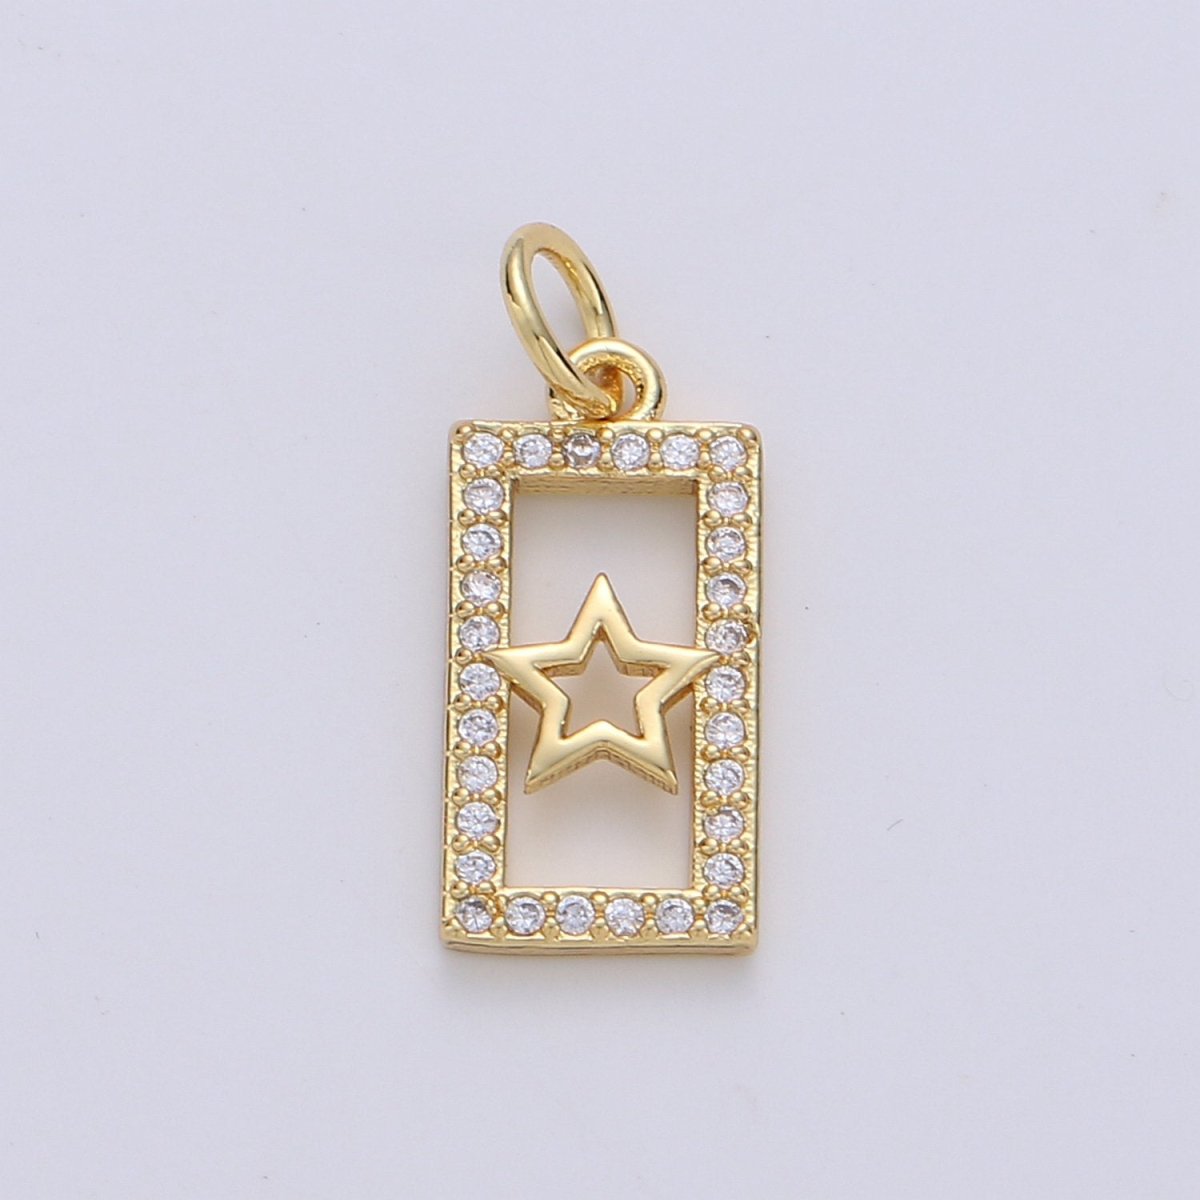 Tiny Star Charm CZ Cubic Zirconia Mini Twinkle Star Charm Gold Charm 14k Gold Filled Micro Pave Charm for Bracelet Necklace Earring Jewelry D-231 - DLUXCA